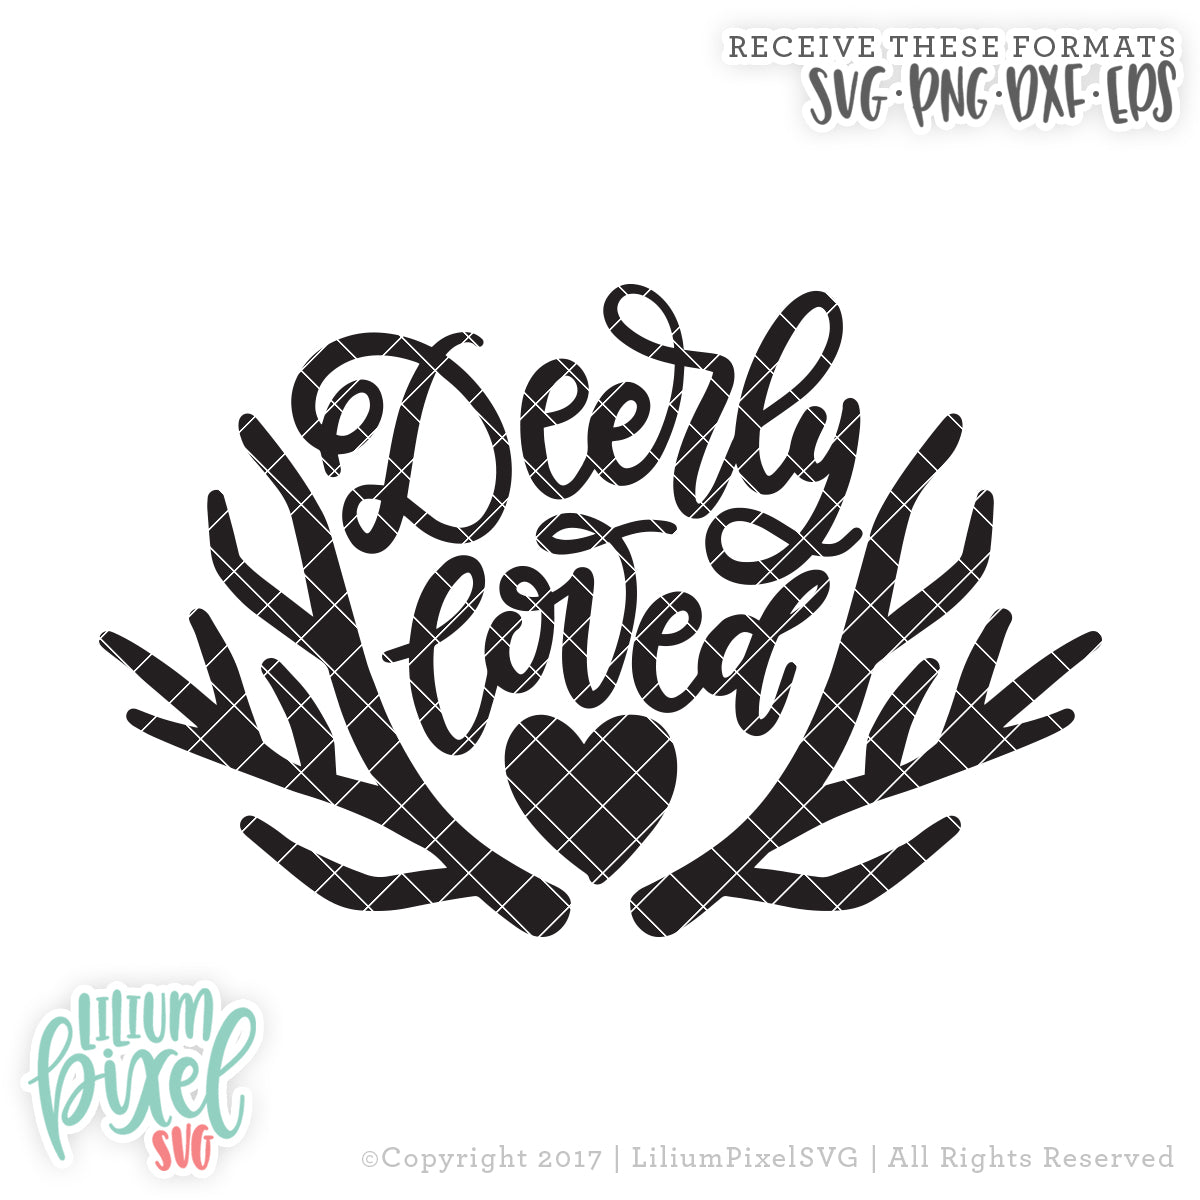 Deerly Loved - SVG PNG DXF EPS Cut File • Silhouette • Cricut • More